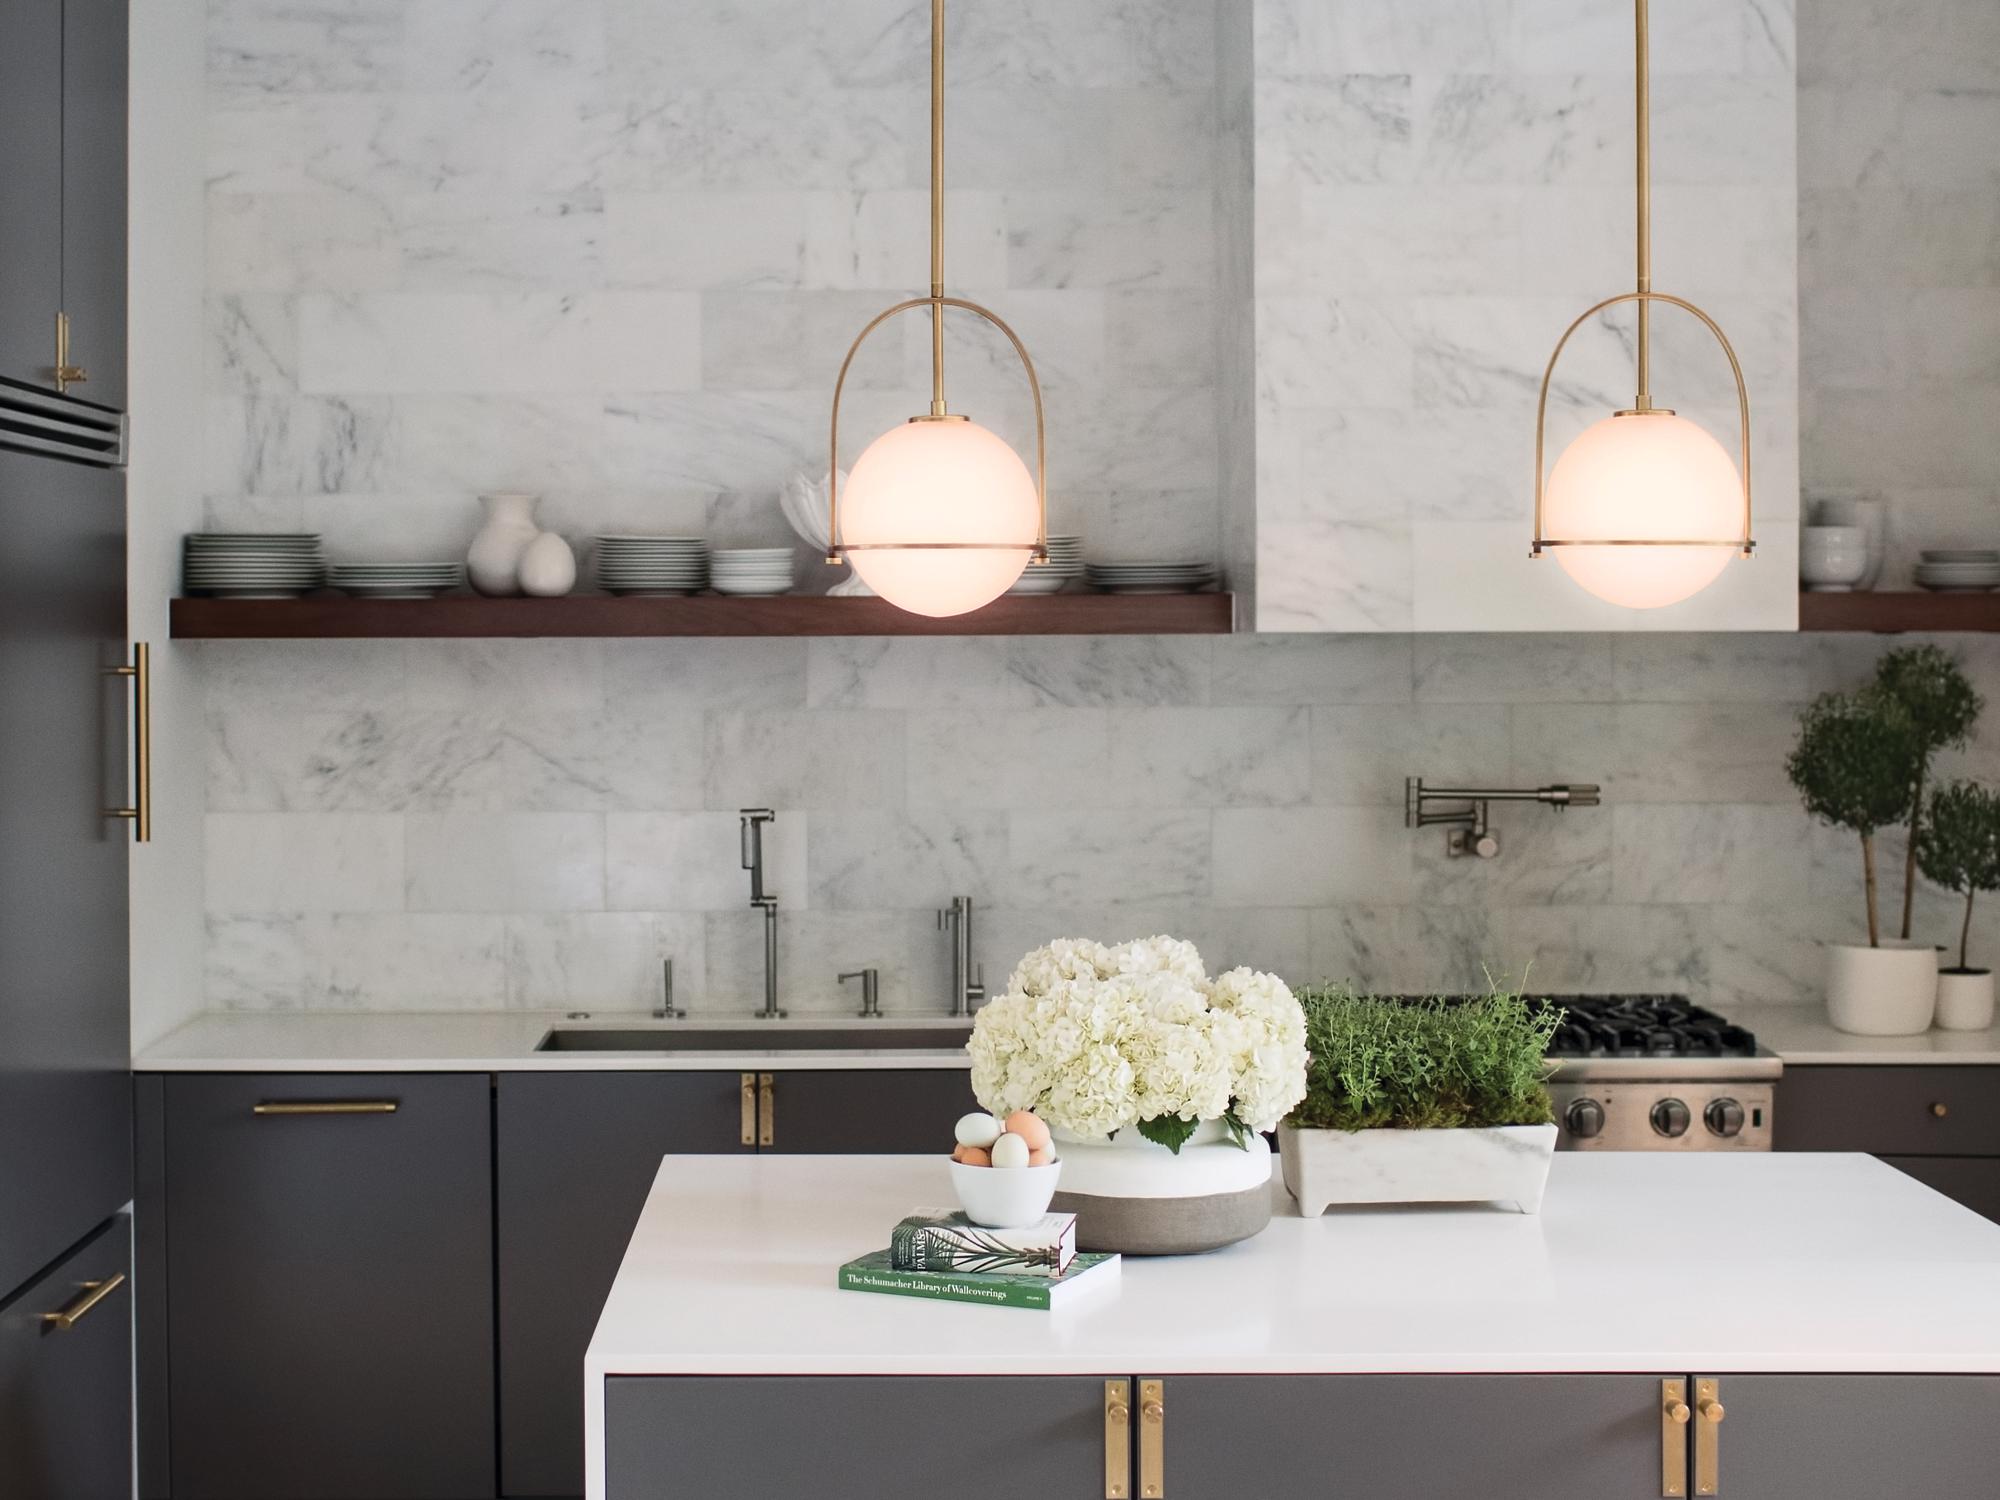 Lighting pendants from the Mars Electric Lighting Showroom in a home kitchen